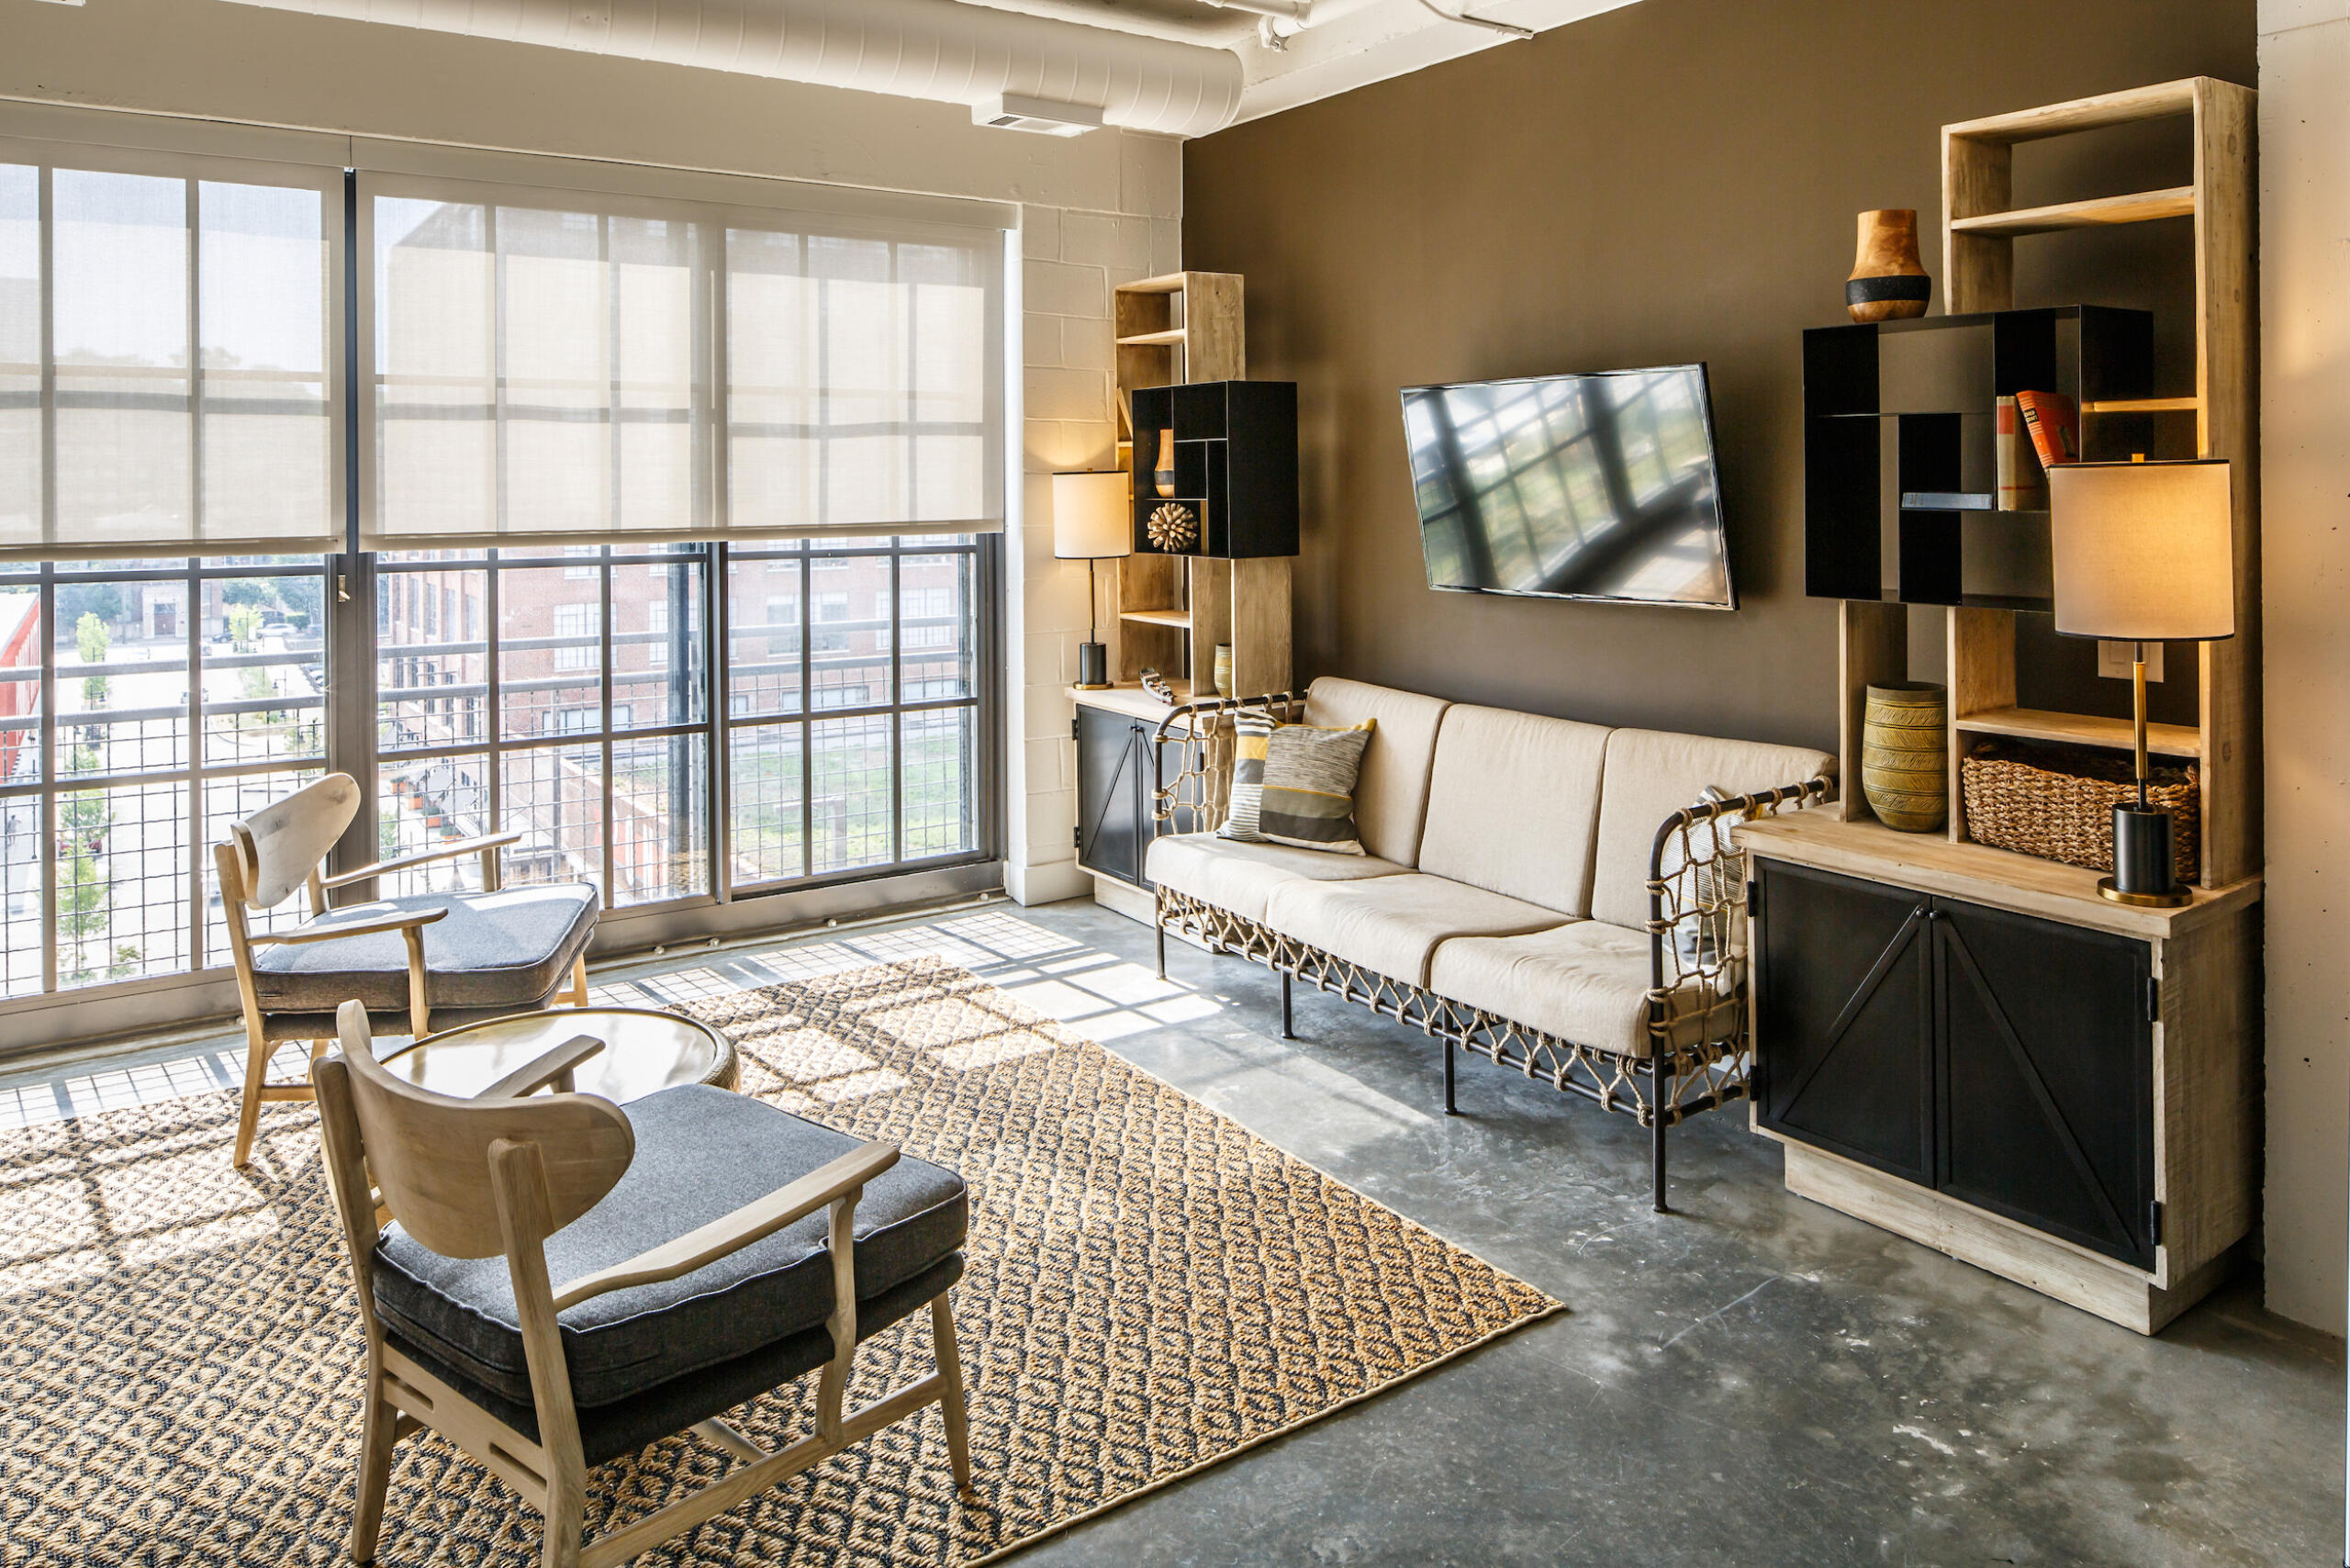 The Flats at Ponce City Market guest suite living area interior with view of building and green roof outside windows